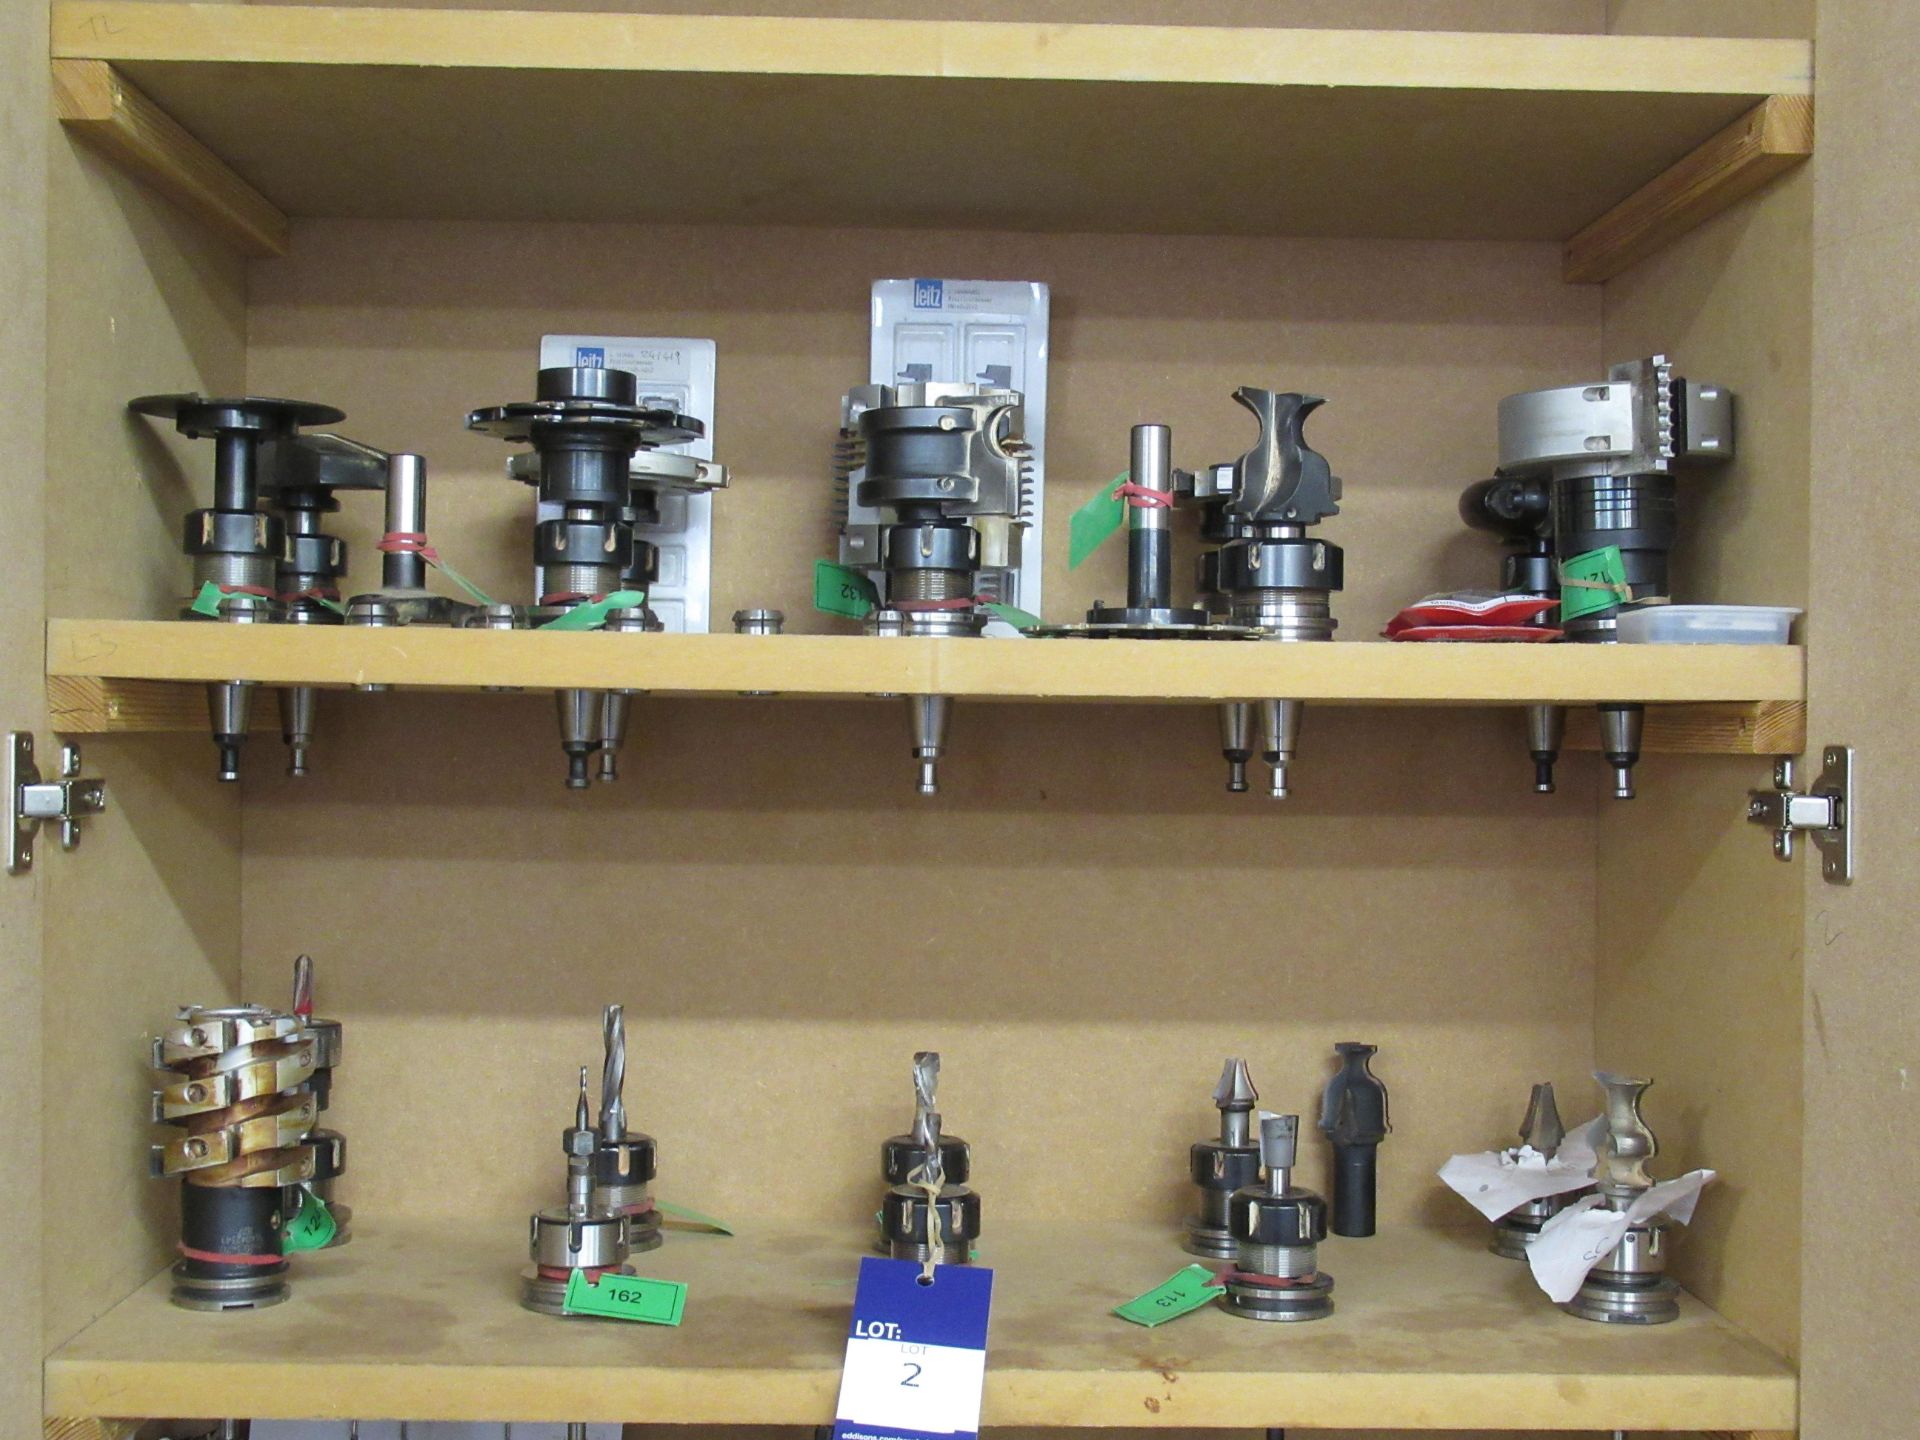 5 shelves of machine tooling suitable for lot 1